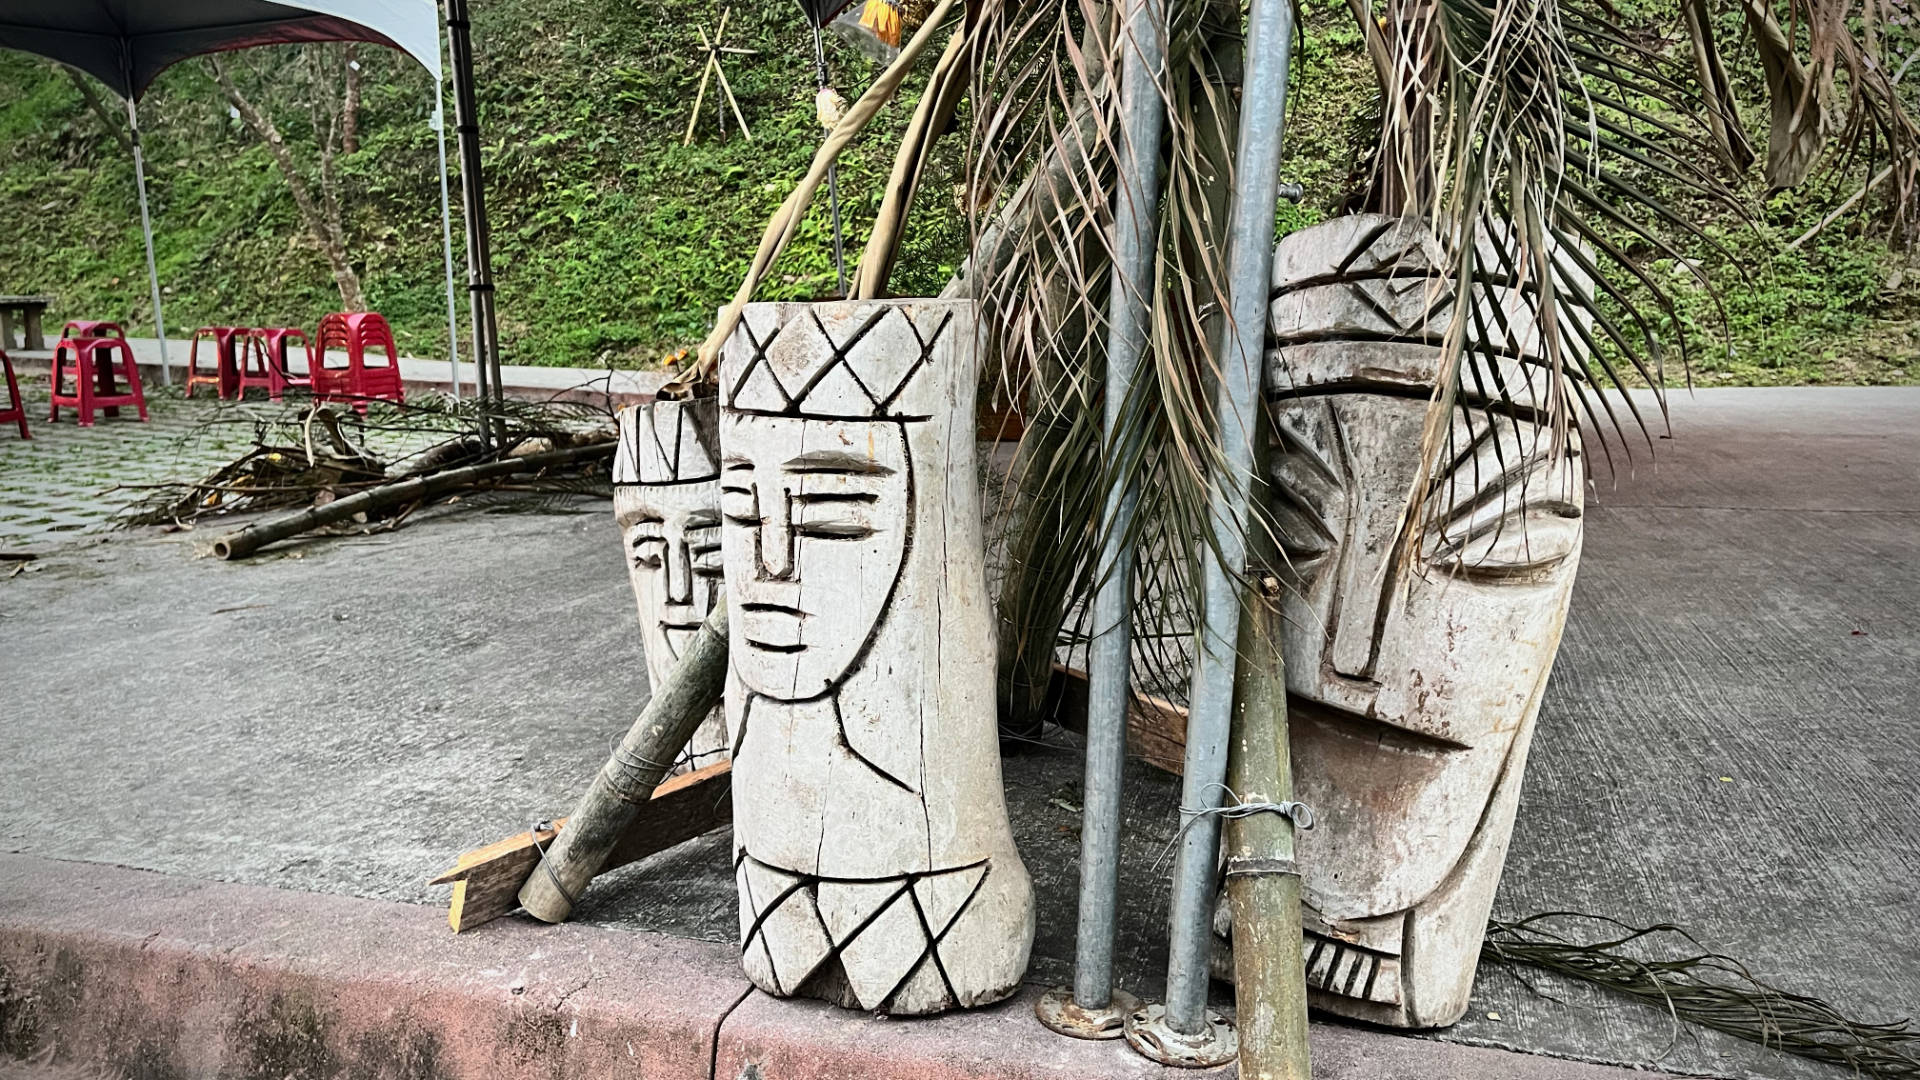 Three or four Bunun carvings, approximately 70 centimeters tall, facing the road.